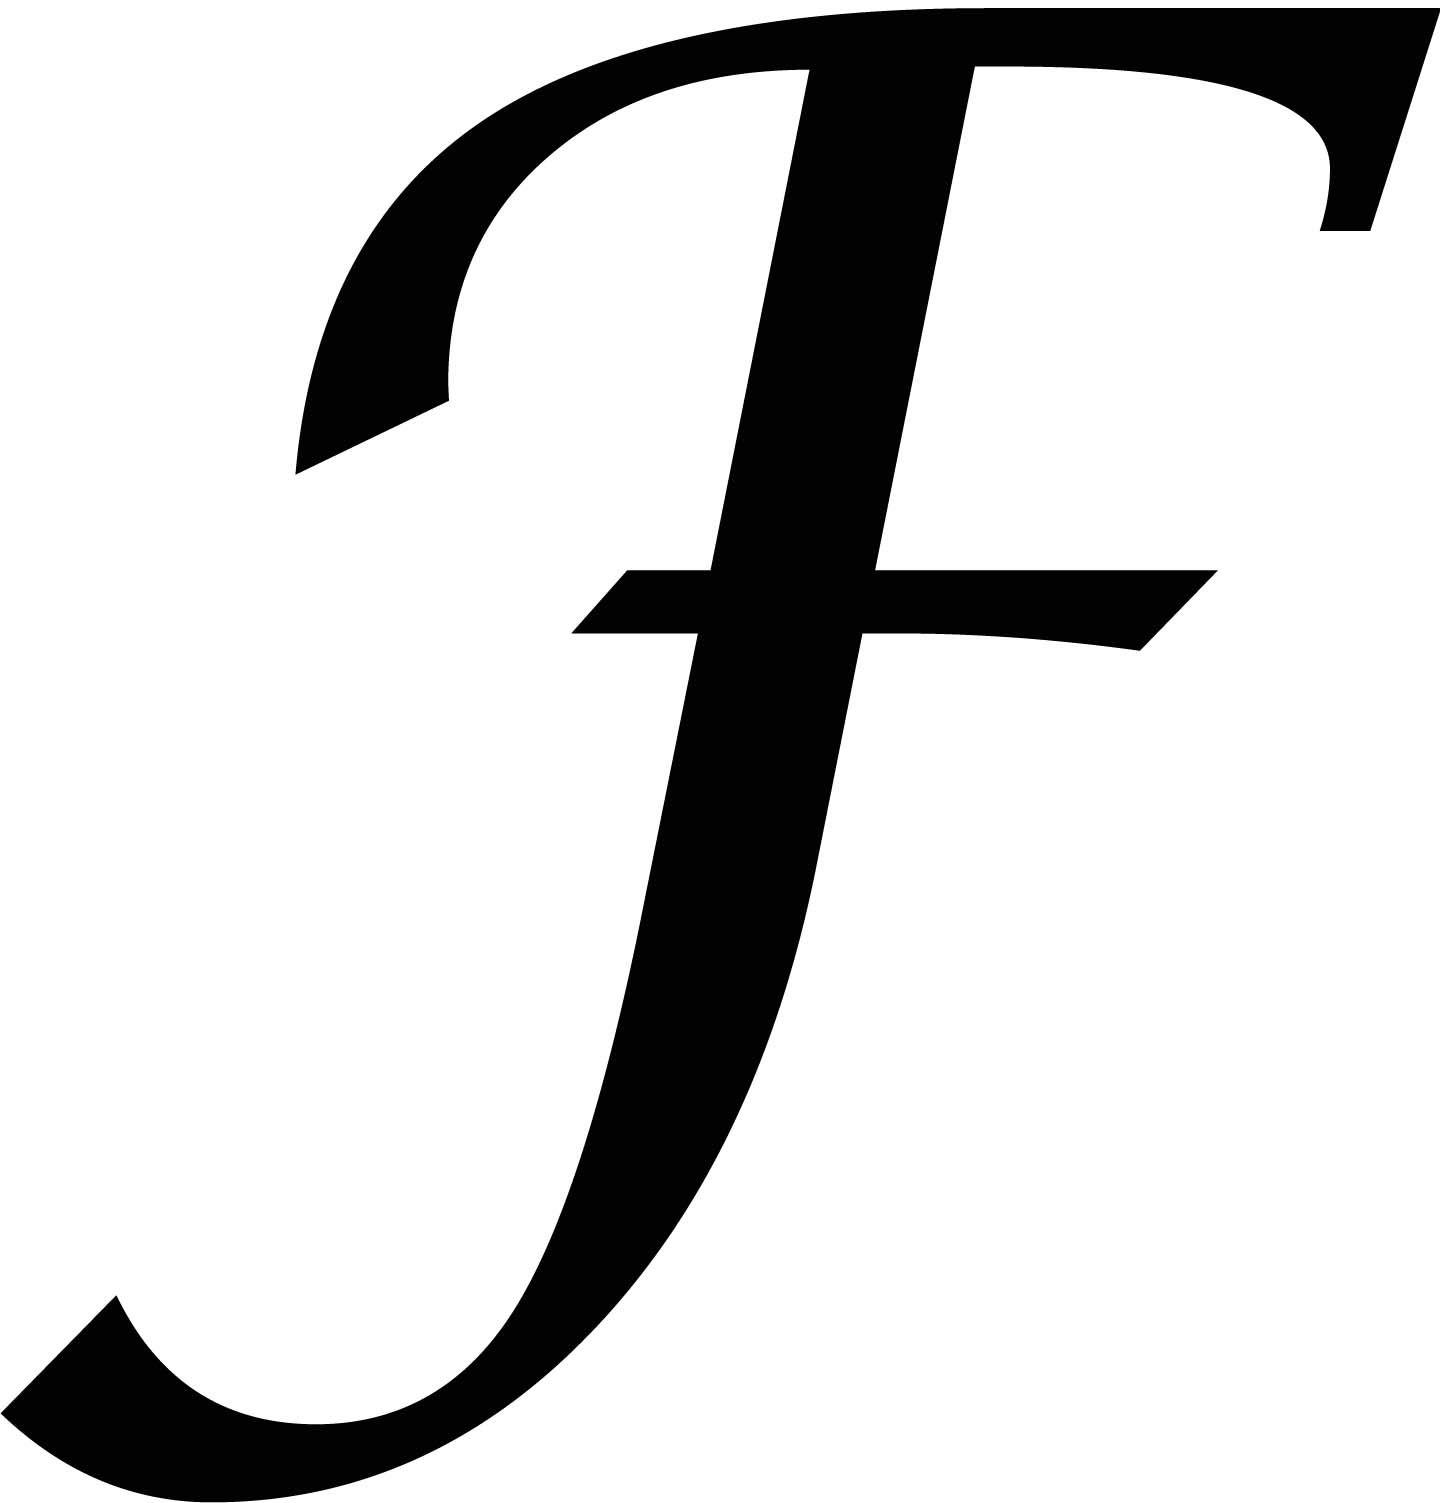 Fancy F Logo - F | created a Letter F Template and printed it out. If you want one ...